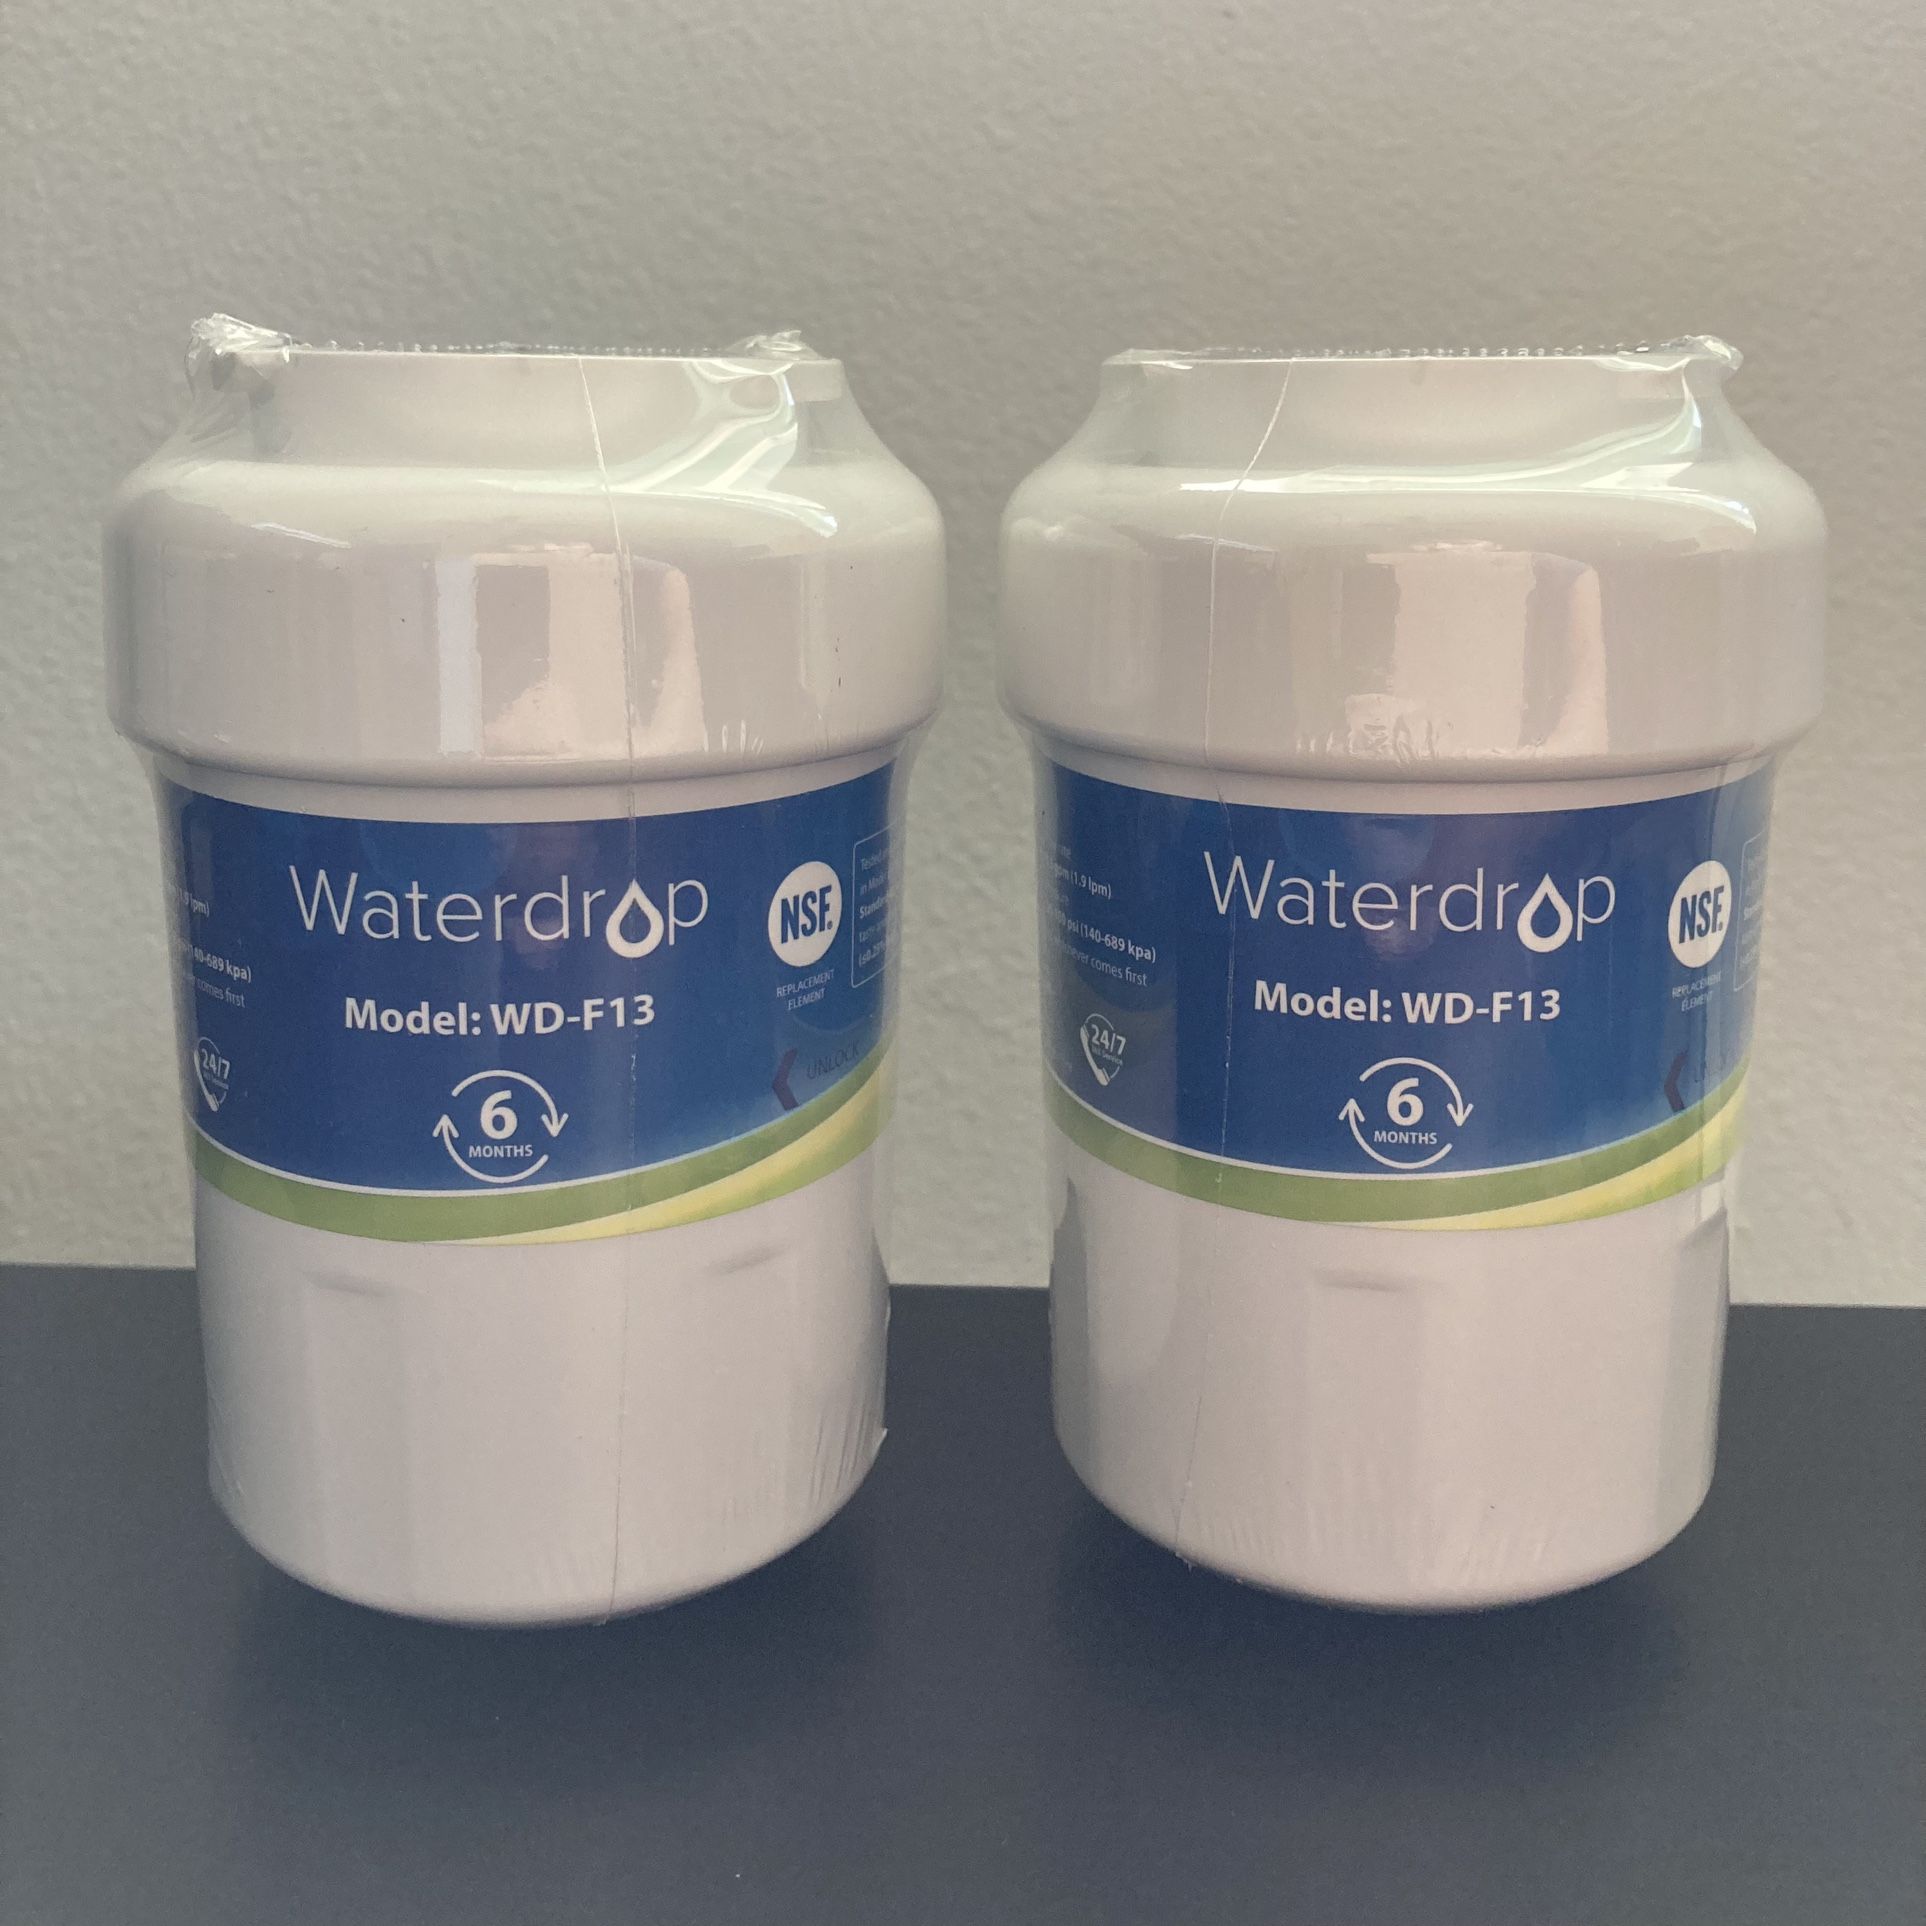 2 Brand New Water Filters for GE Fridge (WD-F13)